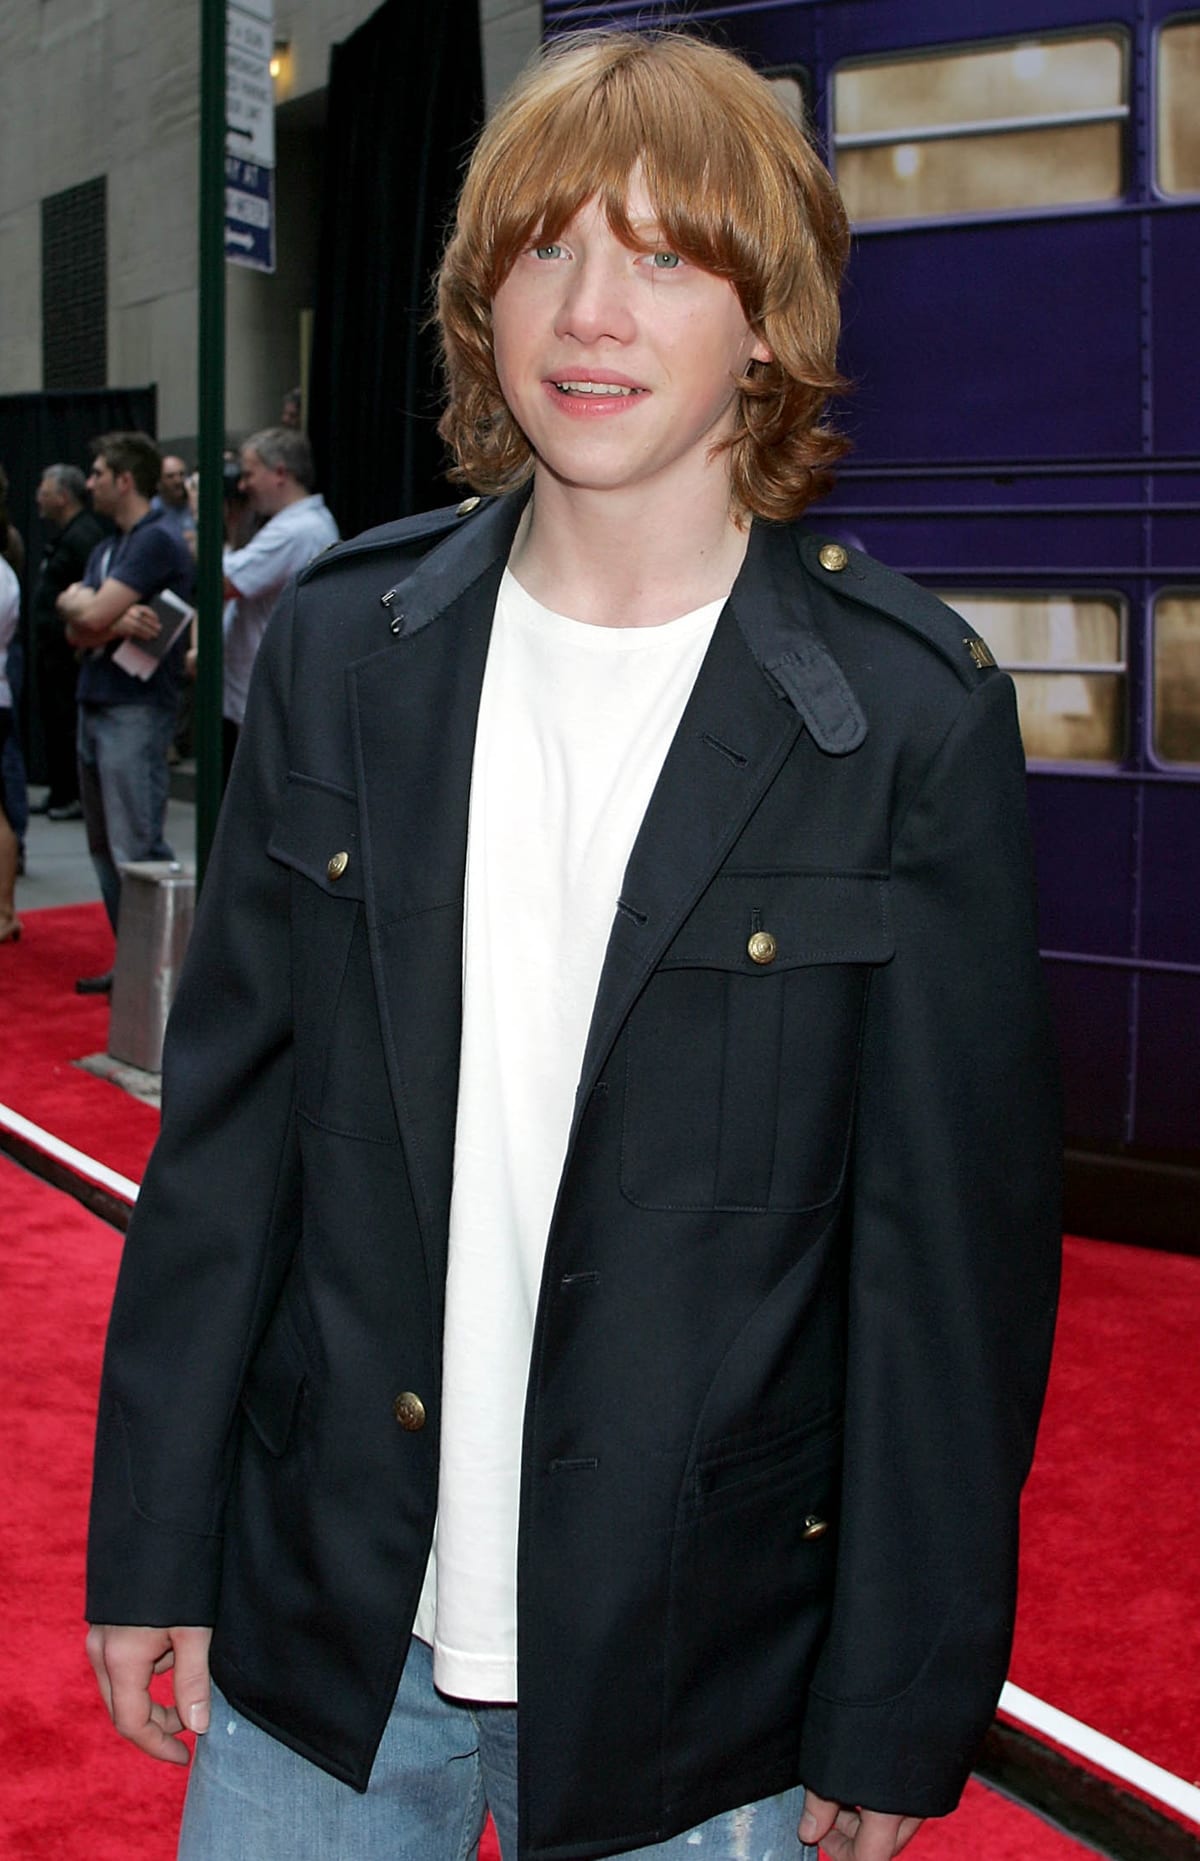 Rupert Grint won the role of Austin Ames in A Cinderella Story but was replaced by Chad Michael Murray